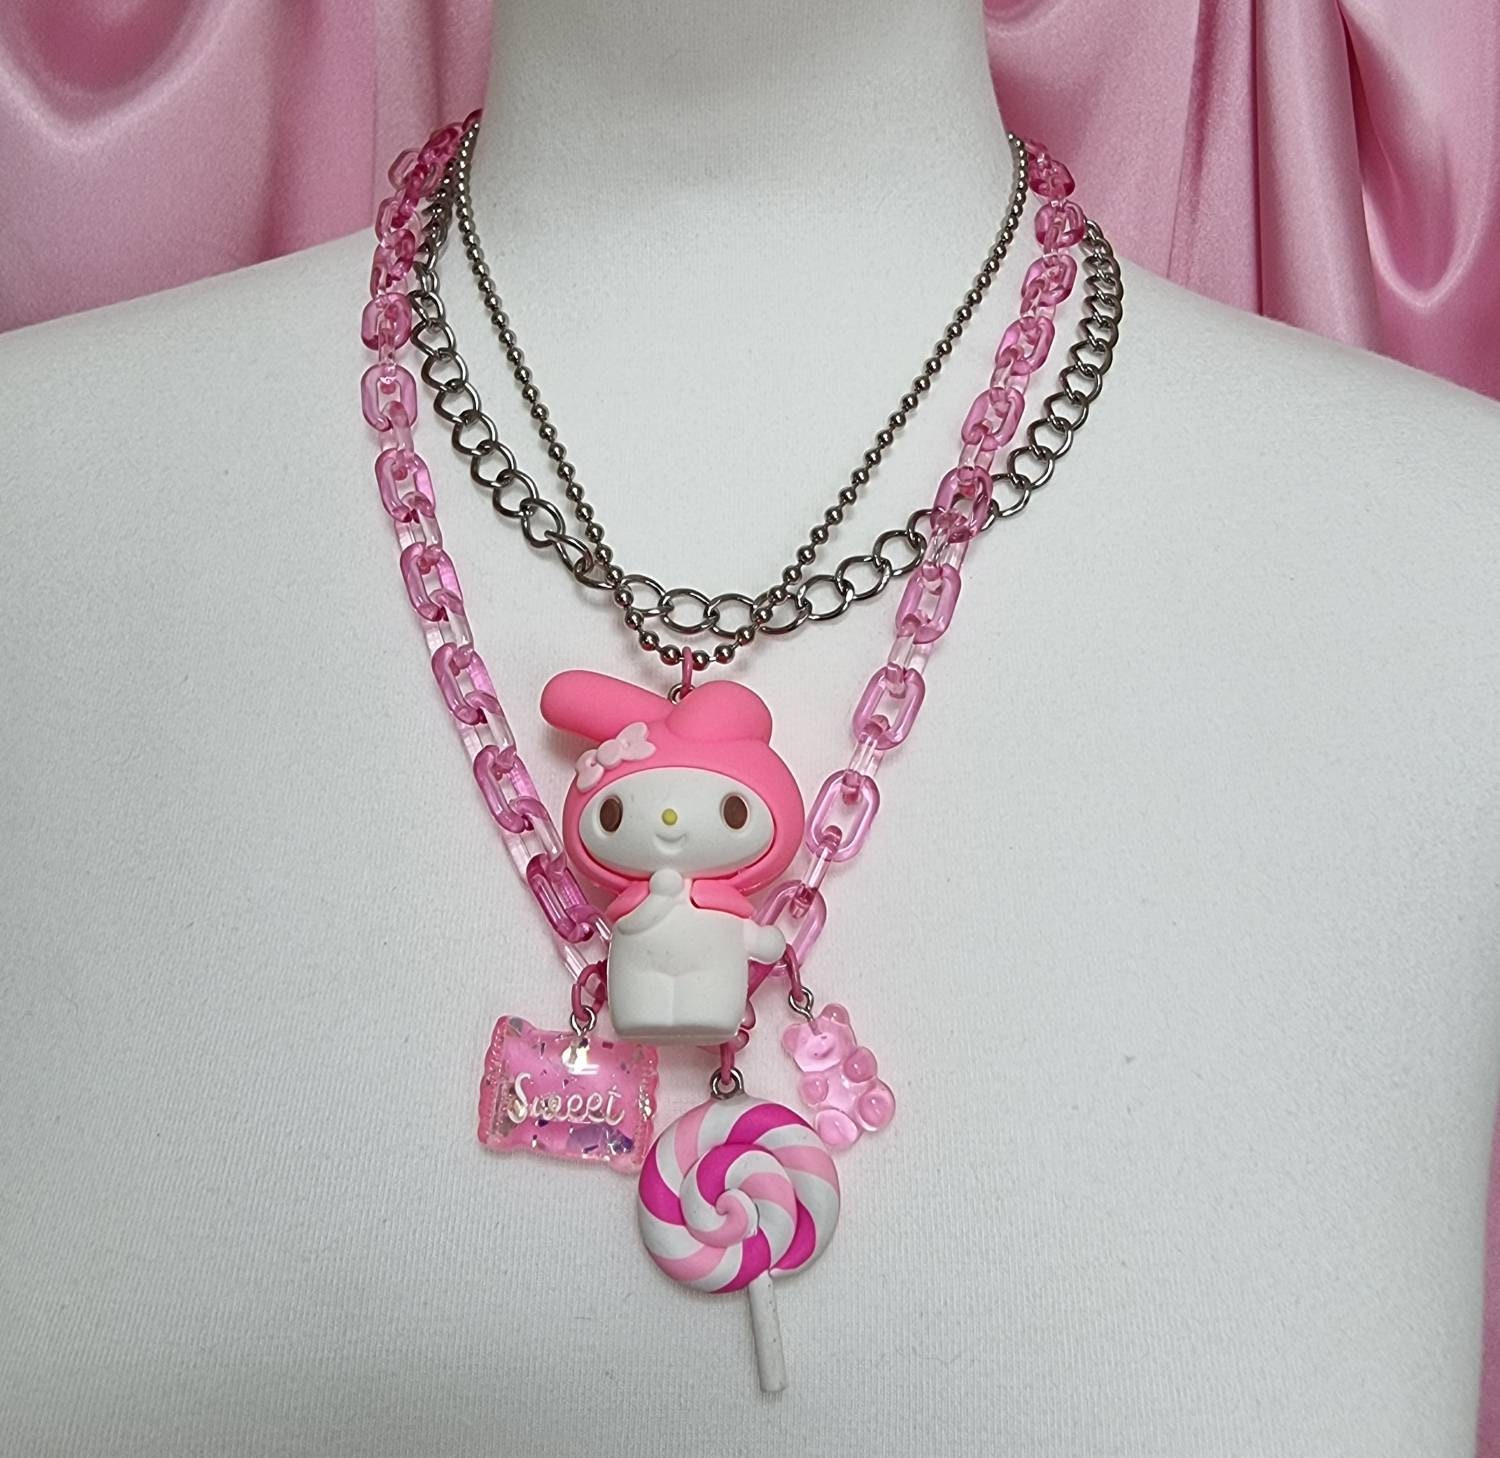 Cute kawaii hello kitty necklace toy doll necklace | Etsy